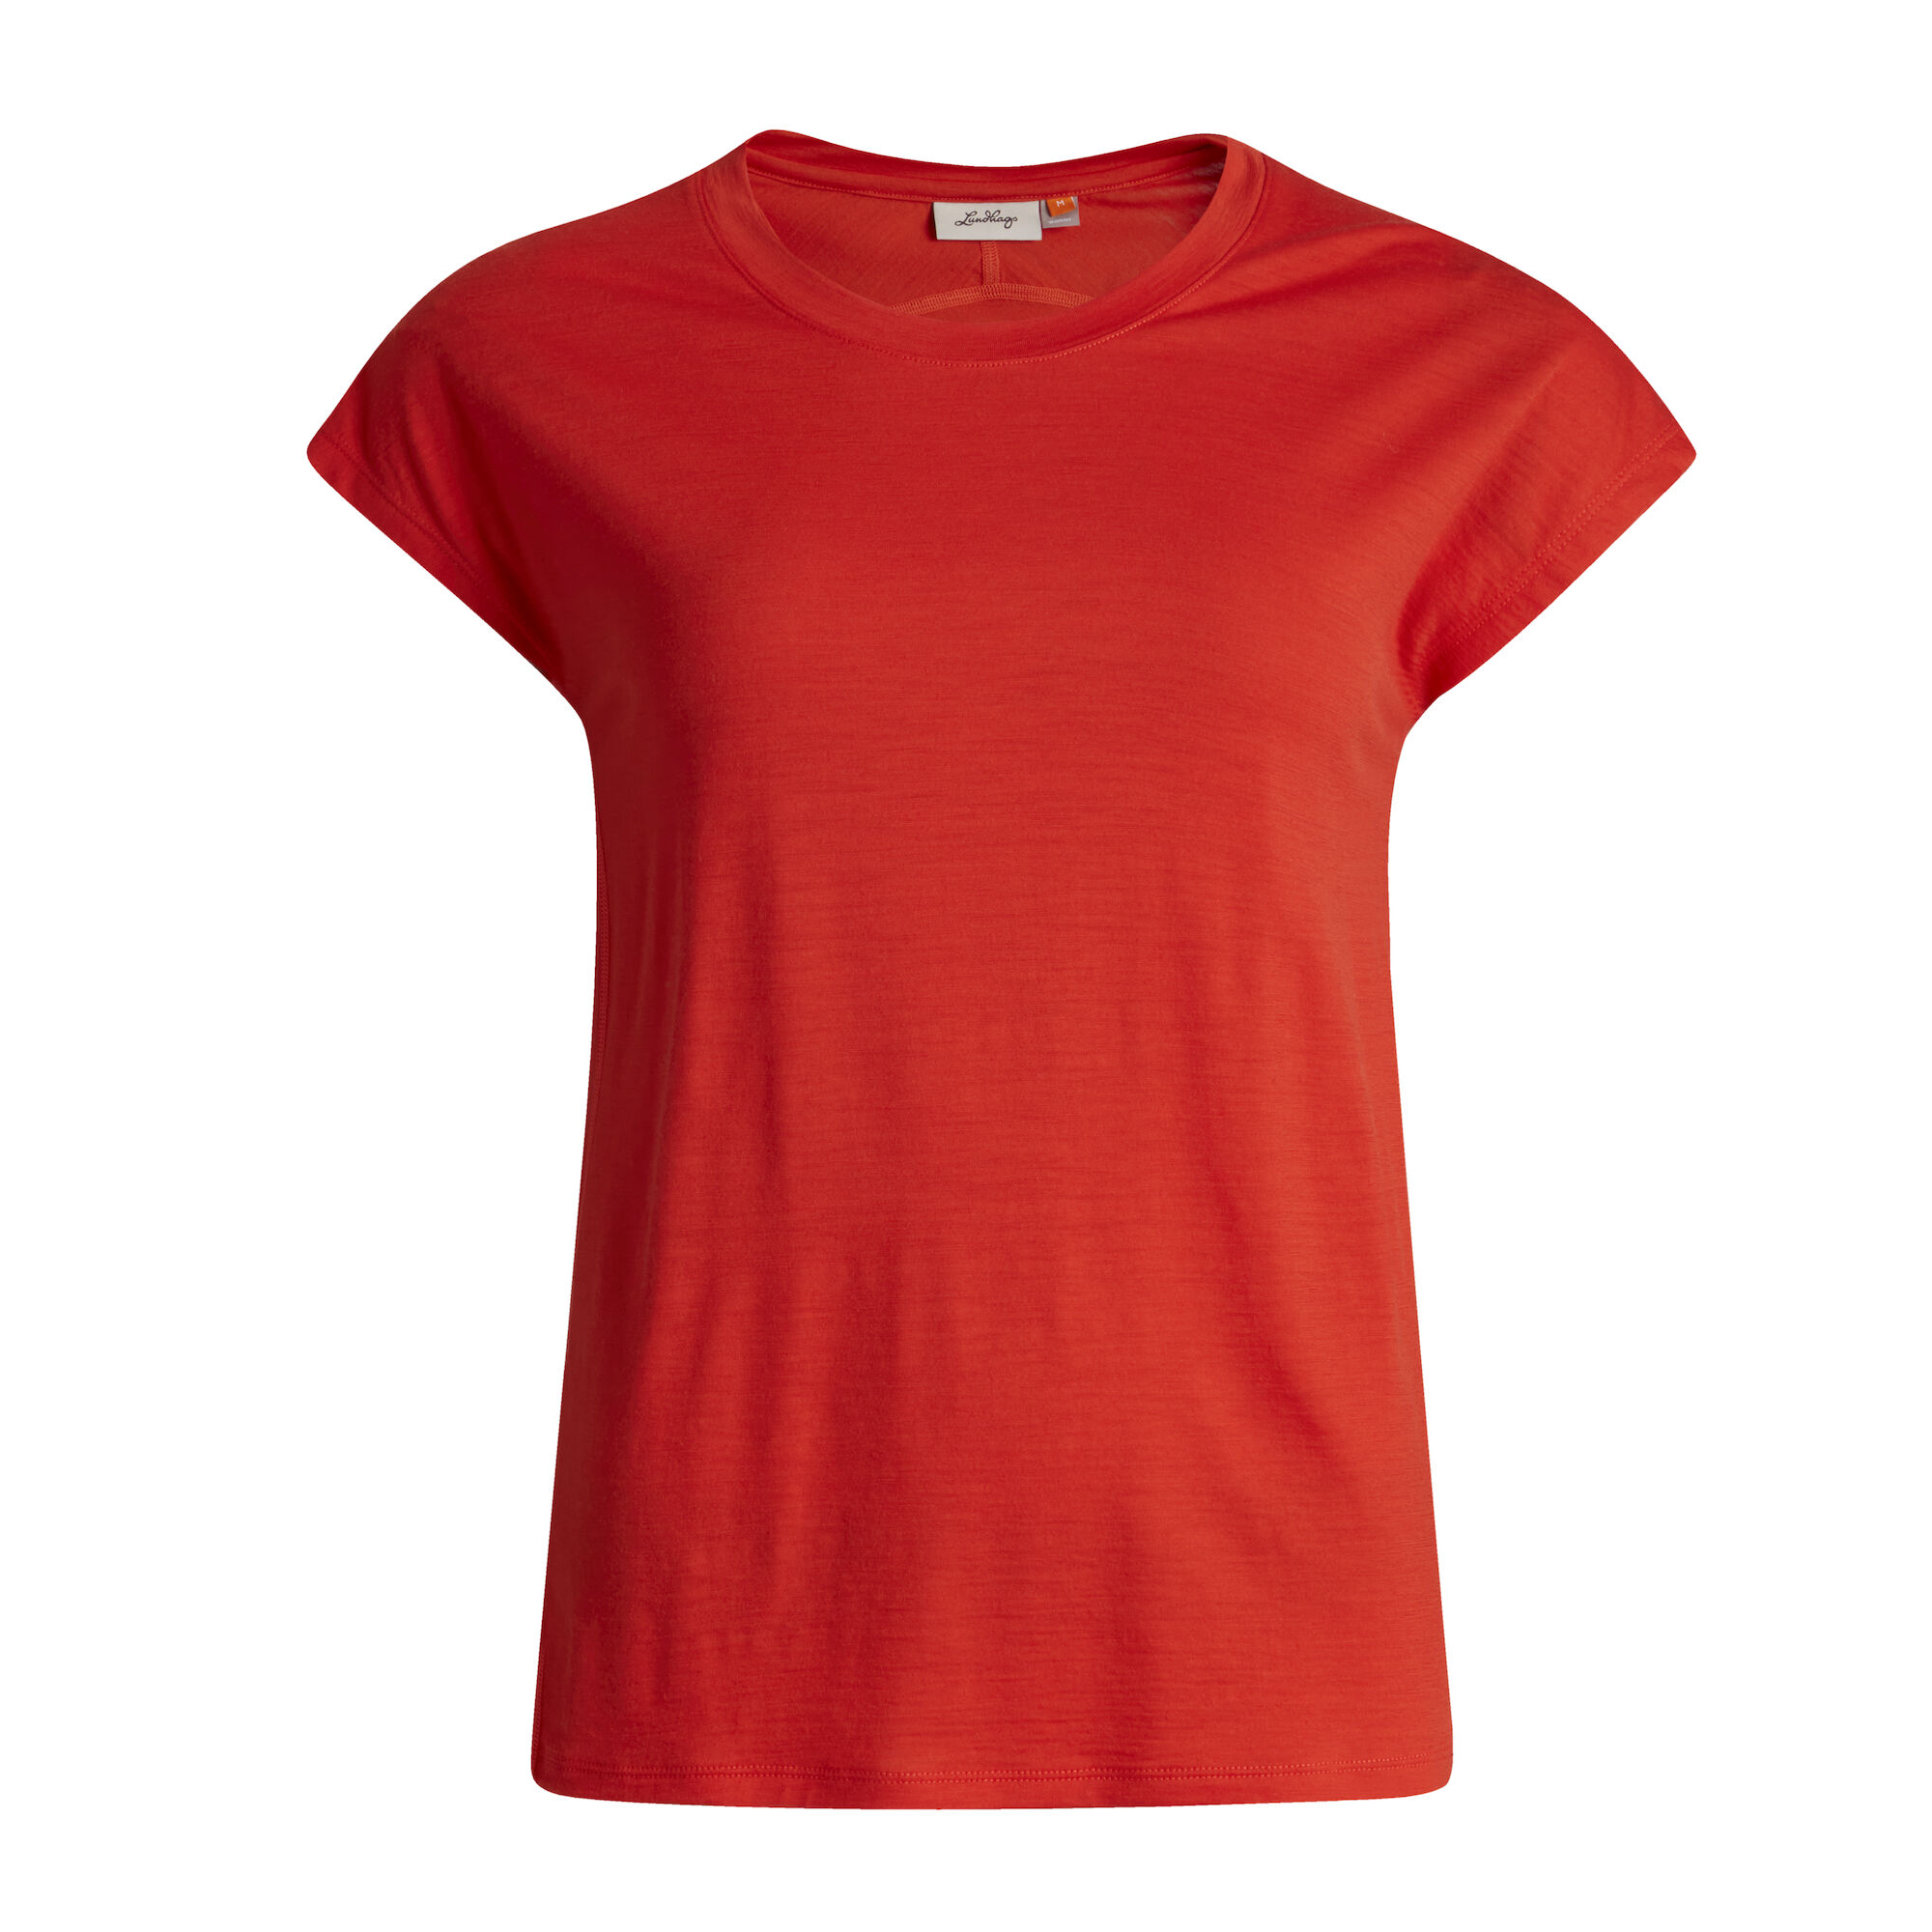 Lundhags Lundhags Women's Gimmer Merino Light Top Lively Red M, Lively Red